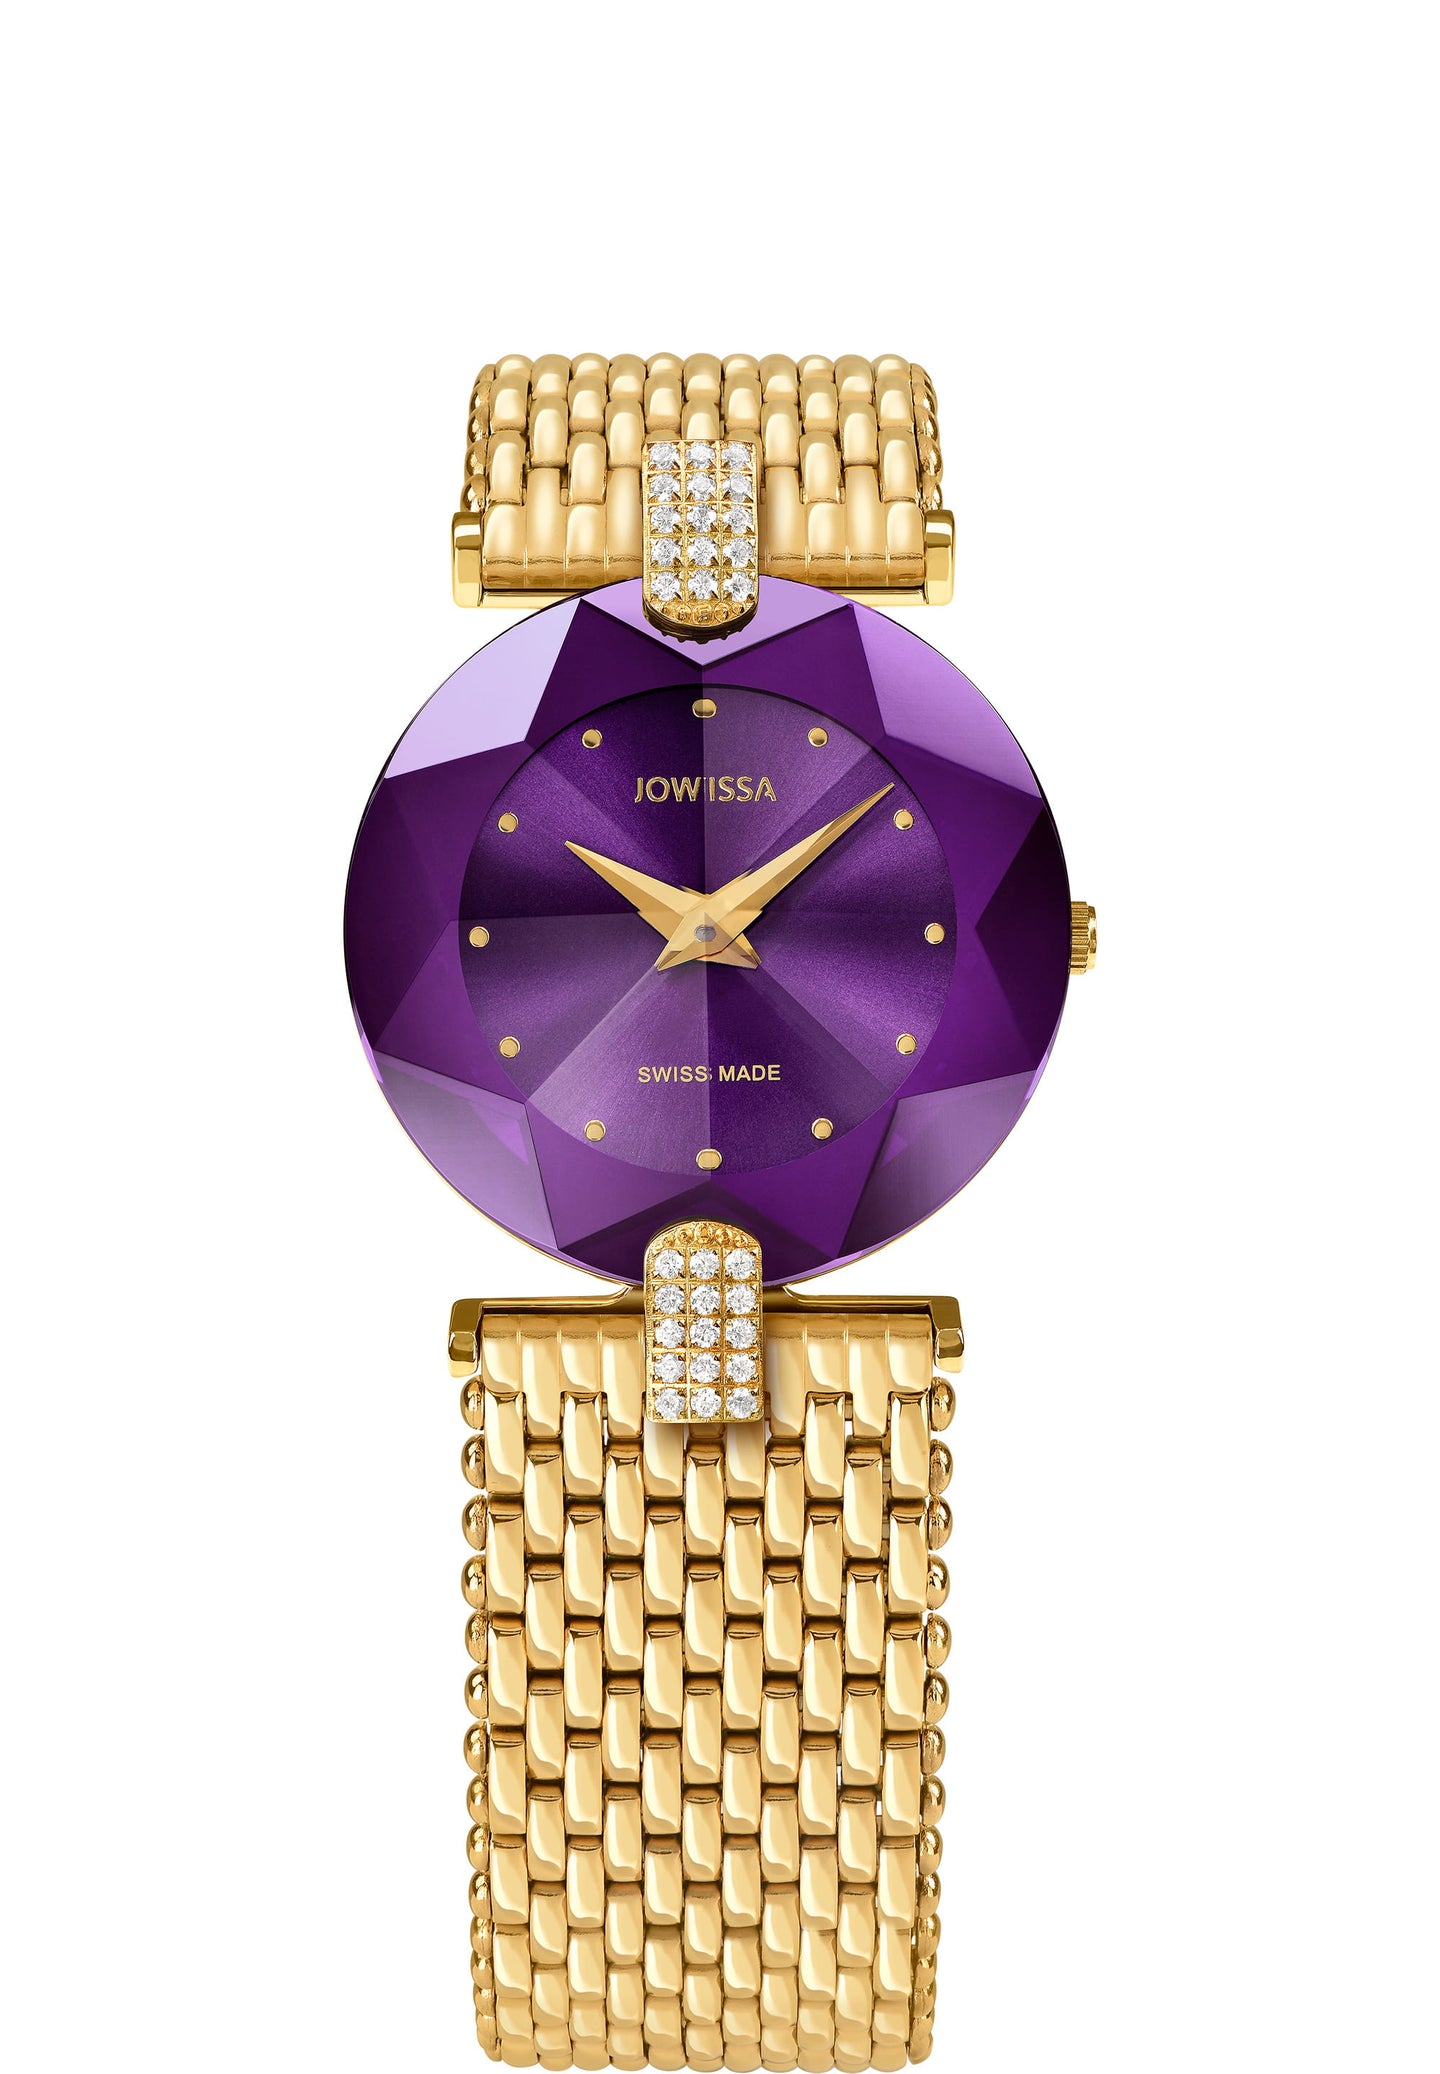 Facet Strass Reloj Mujer Suizo J5.016.M